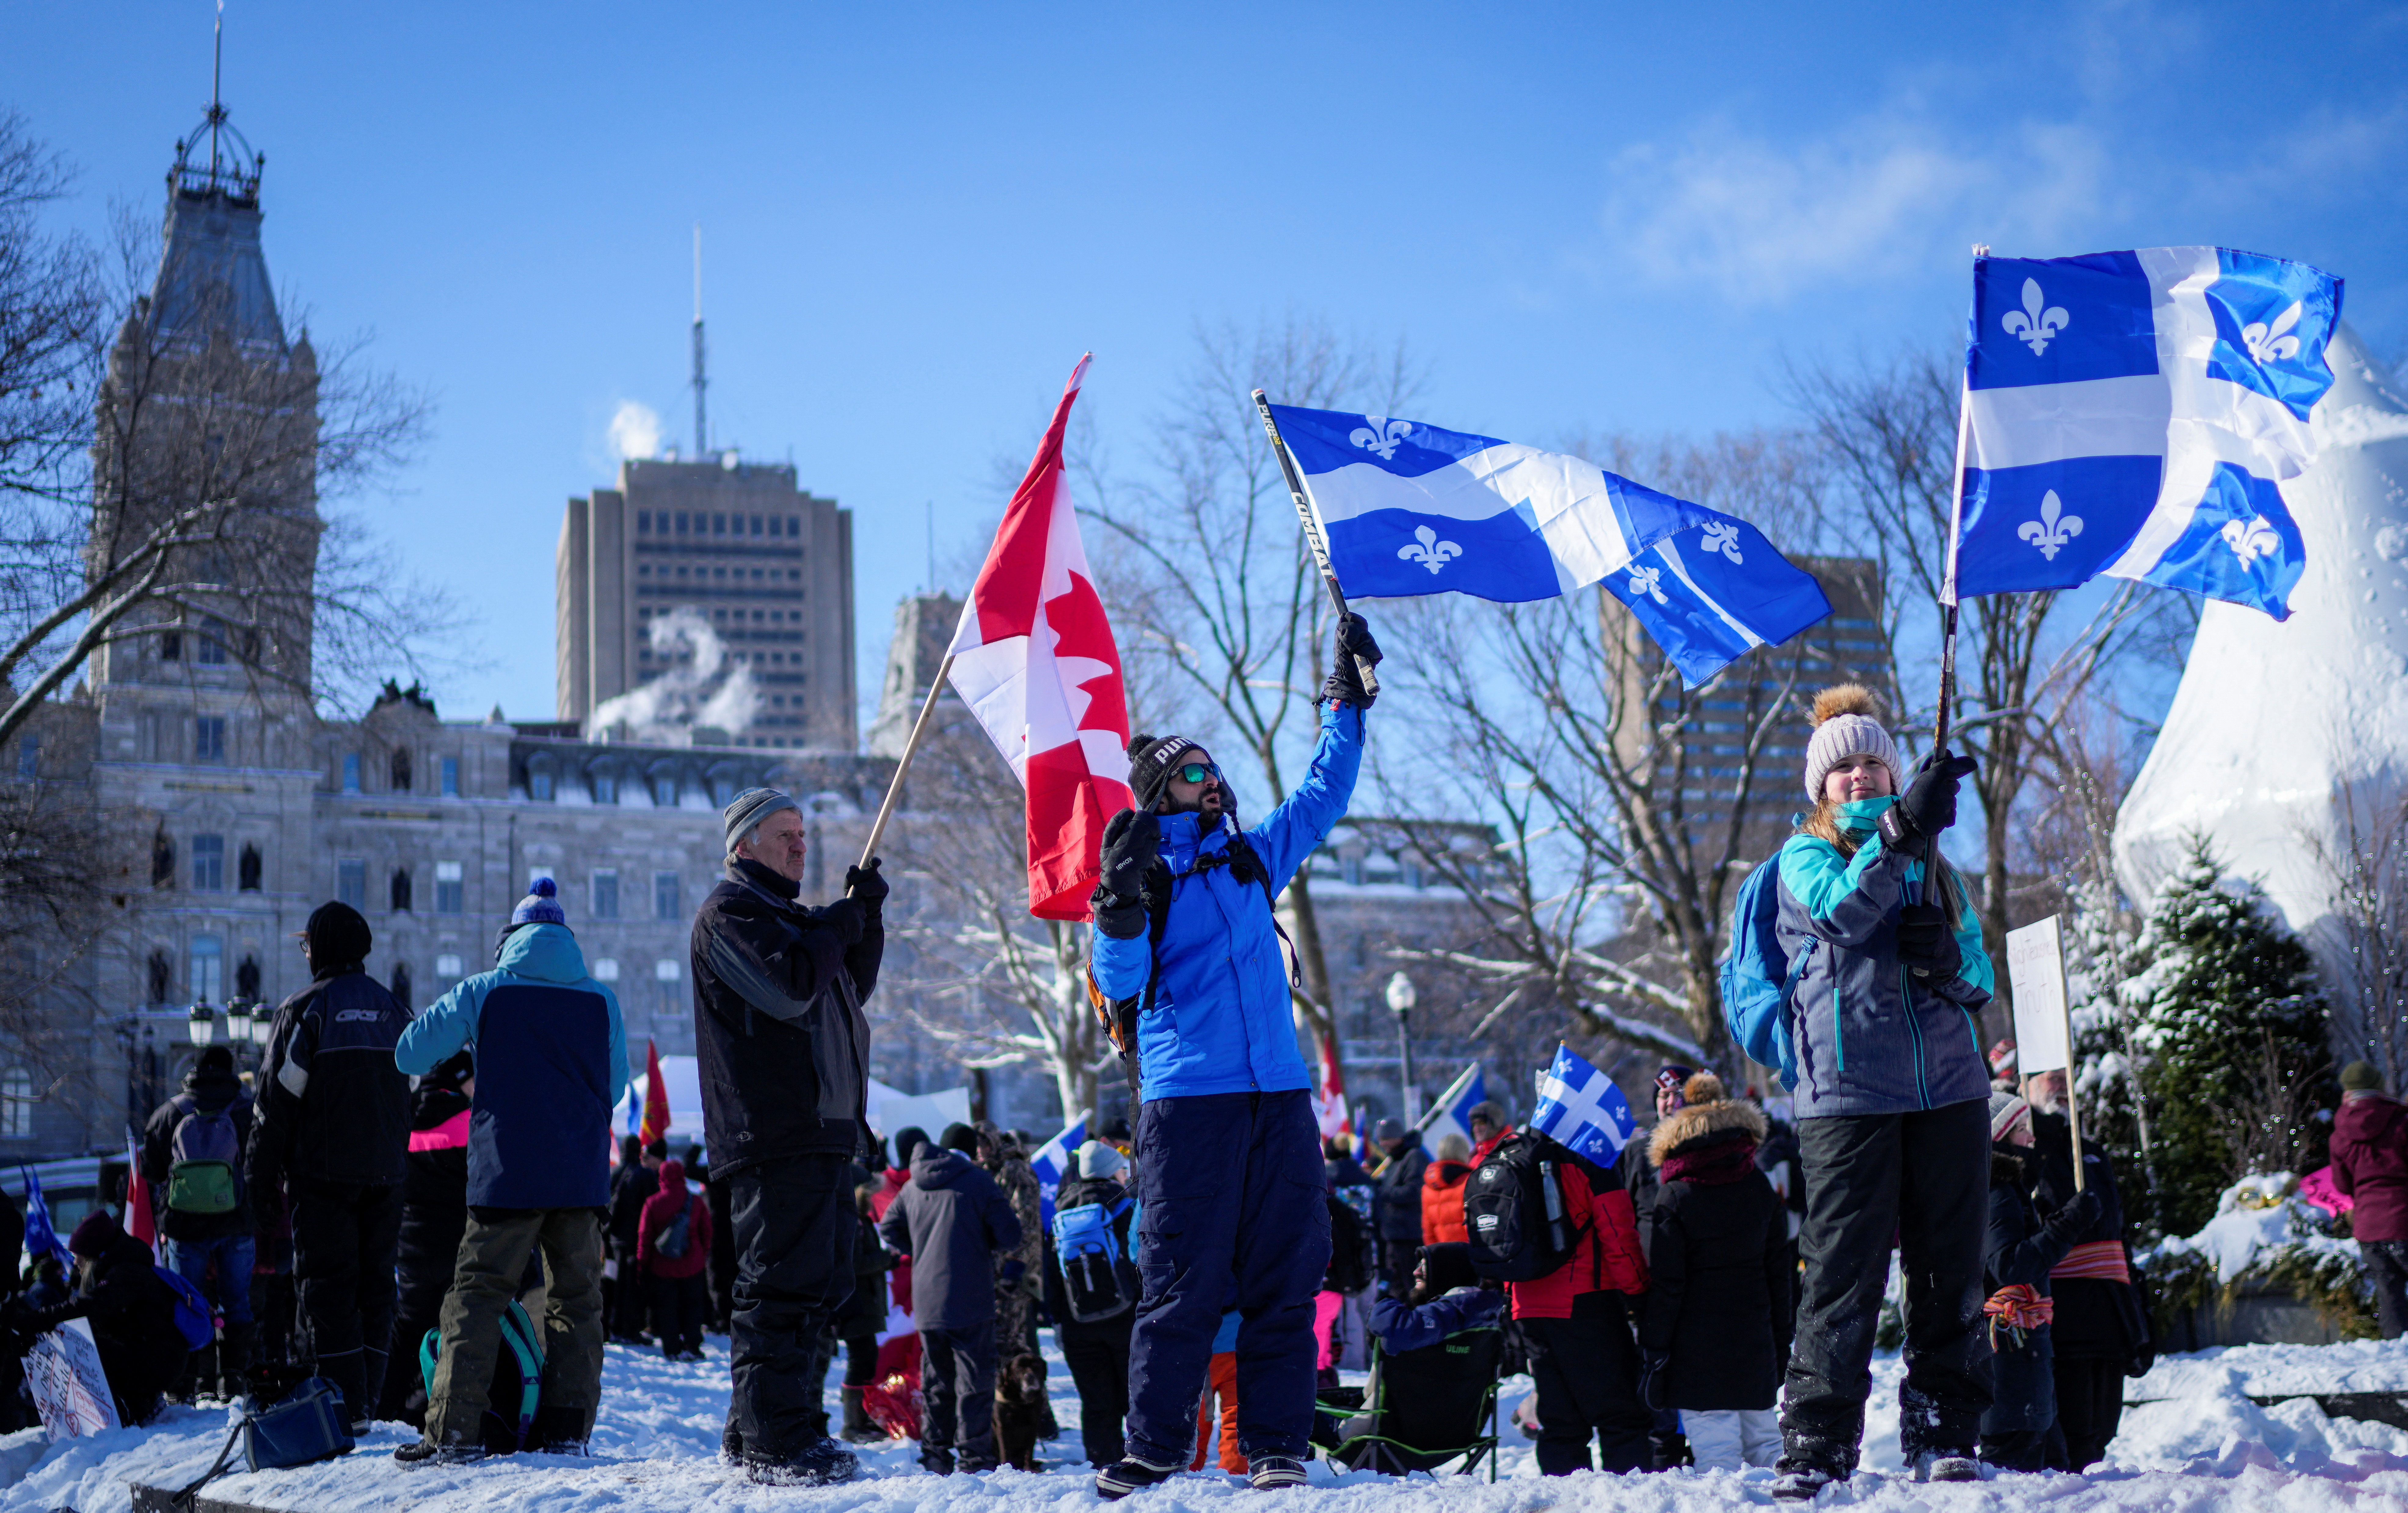 People wave flags near the National Assembly of Quebec, as truckers and their supporters protest against the coronavirus disease (COVID-19) vaccine mandates, in Quebec City, Canada February 5, 2022. REUTERS/Mathieu Belanger